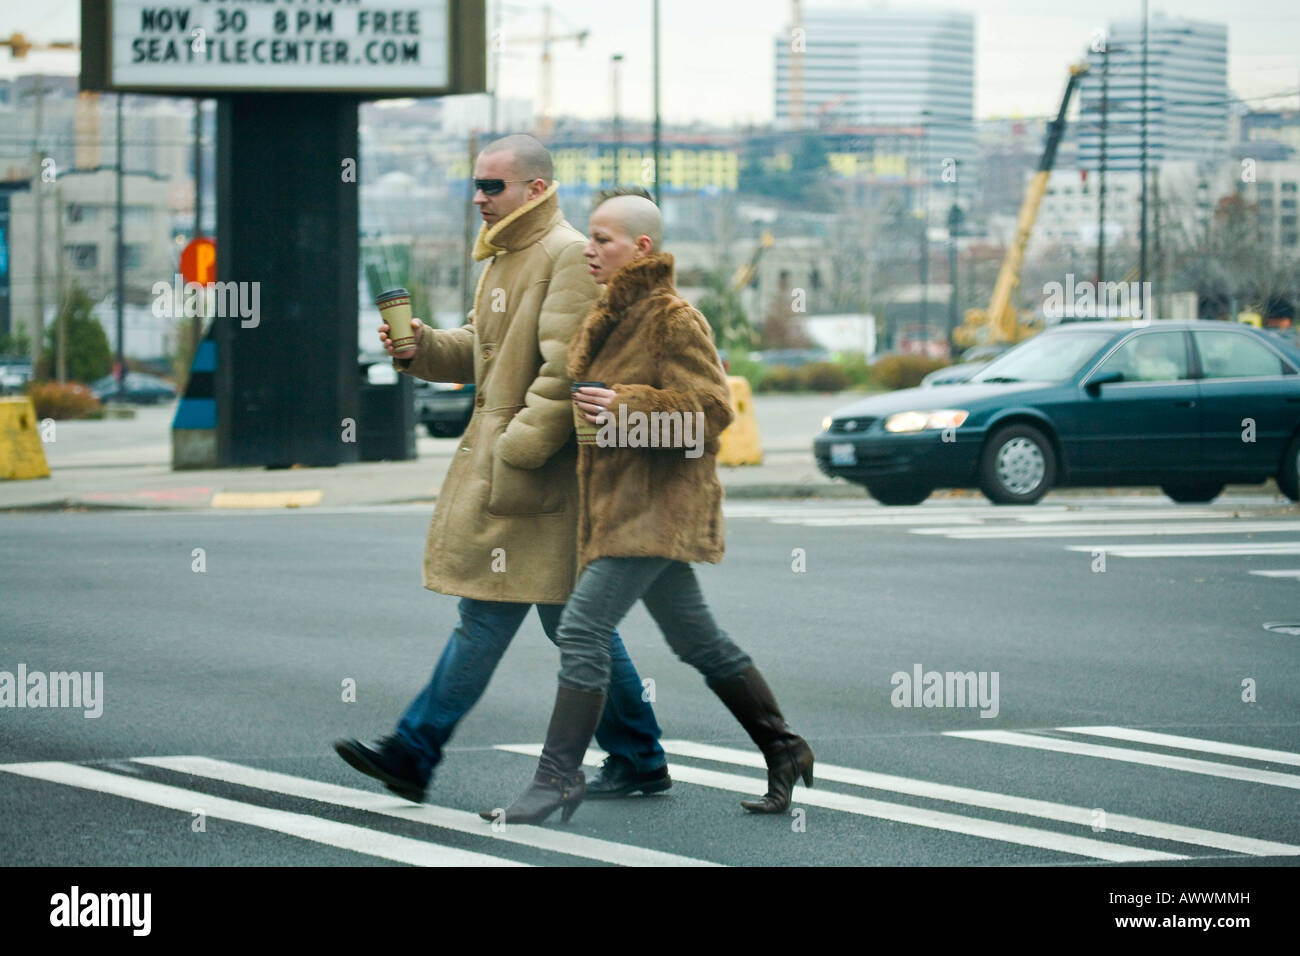 couple in letaher jackets and shaved heads walking in seattle with coffee in hand Stock Photo